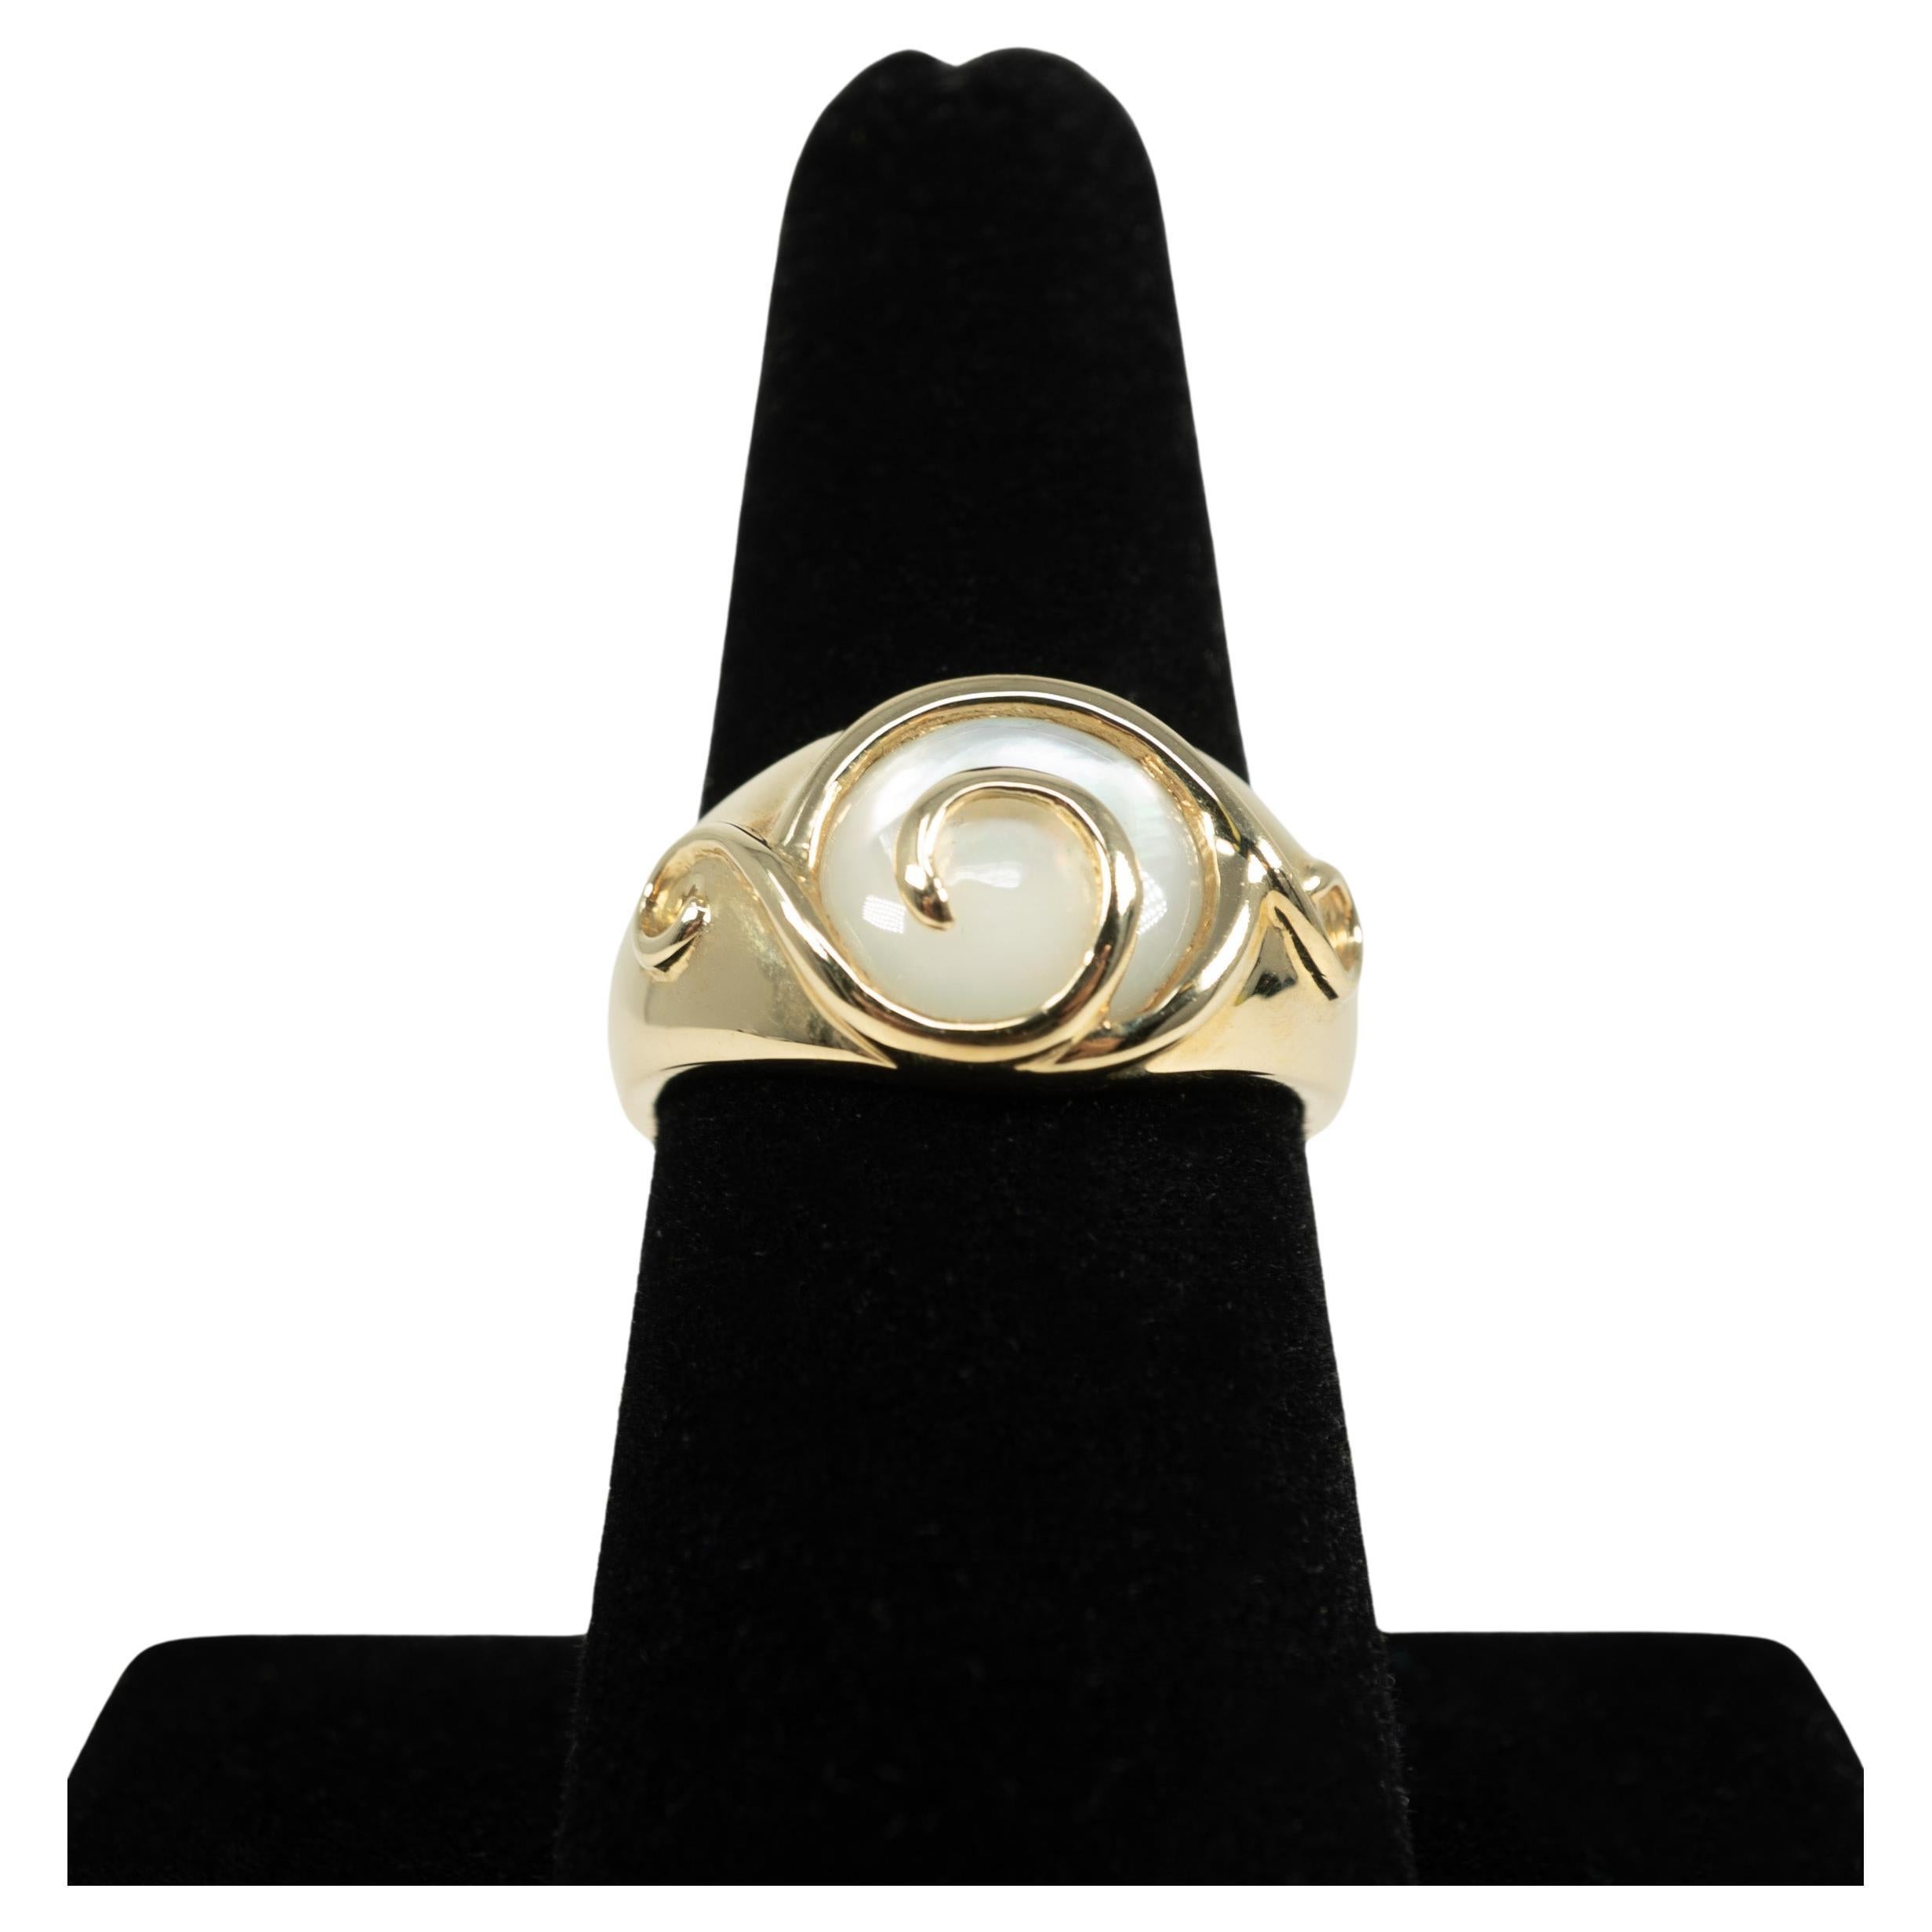 In 14 karat yellow gold, this ring is centered with one circular mother-of-pearl inlay.